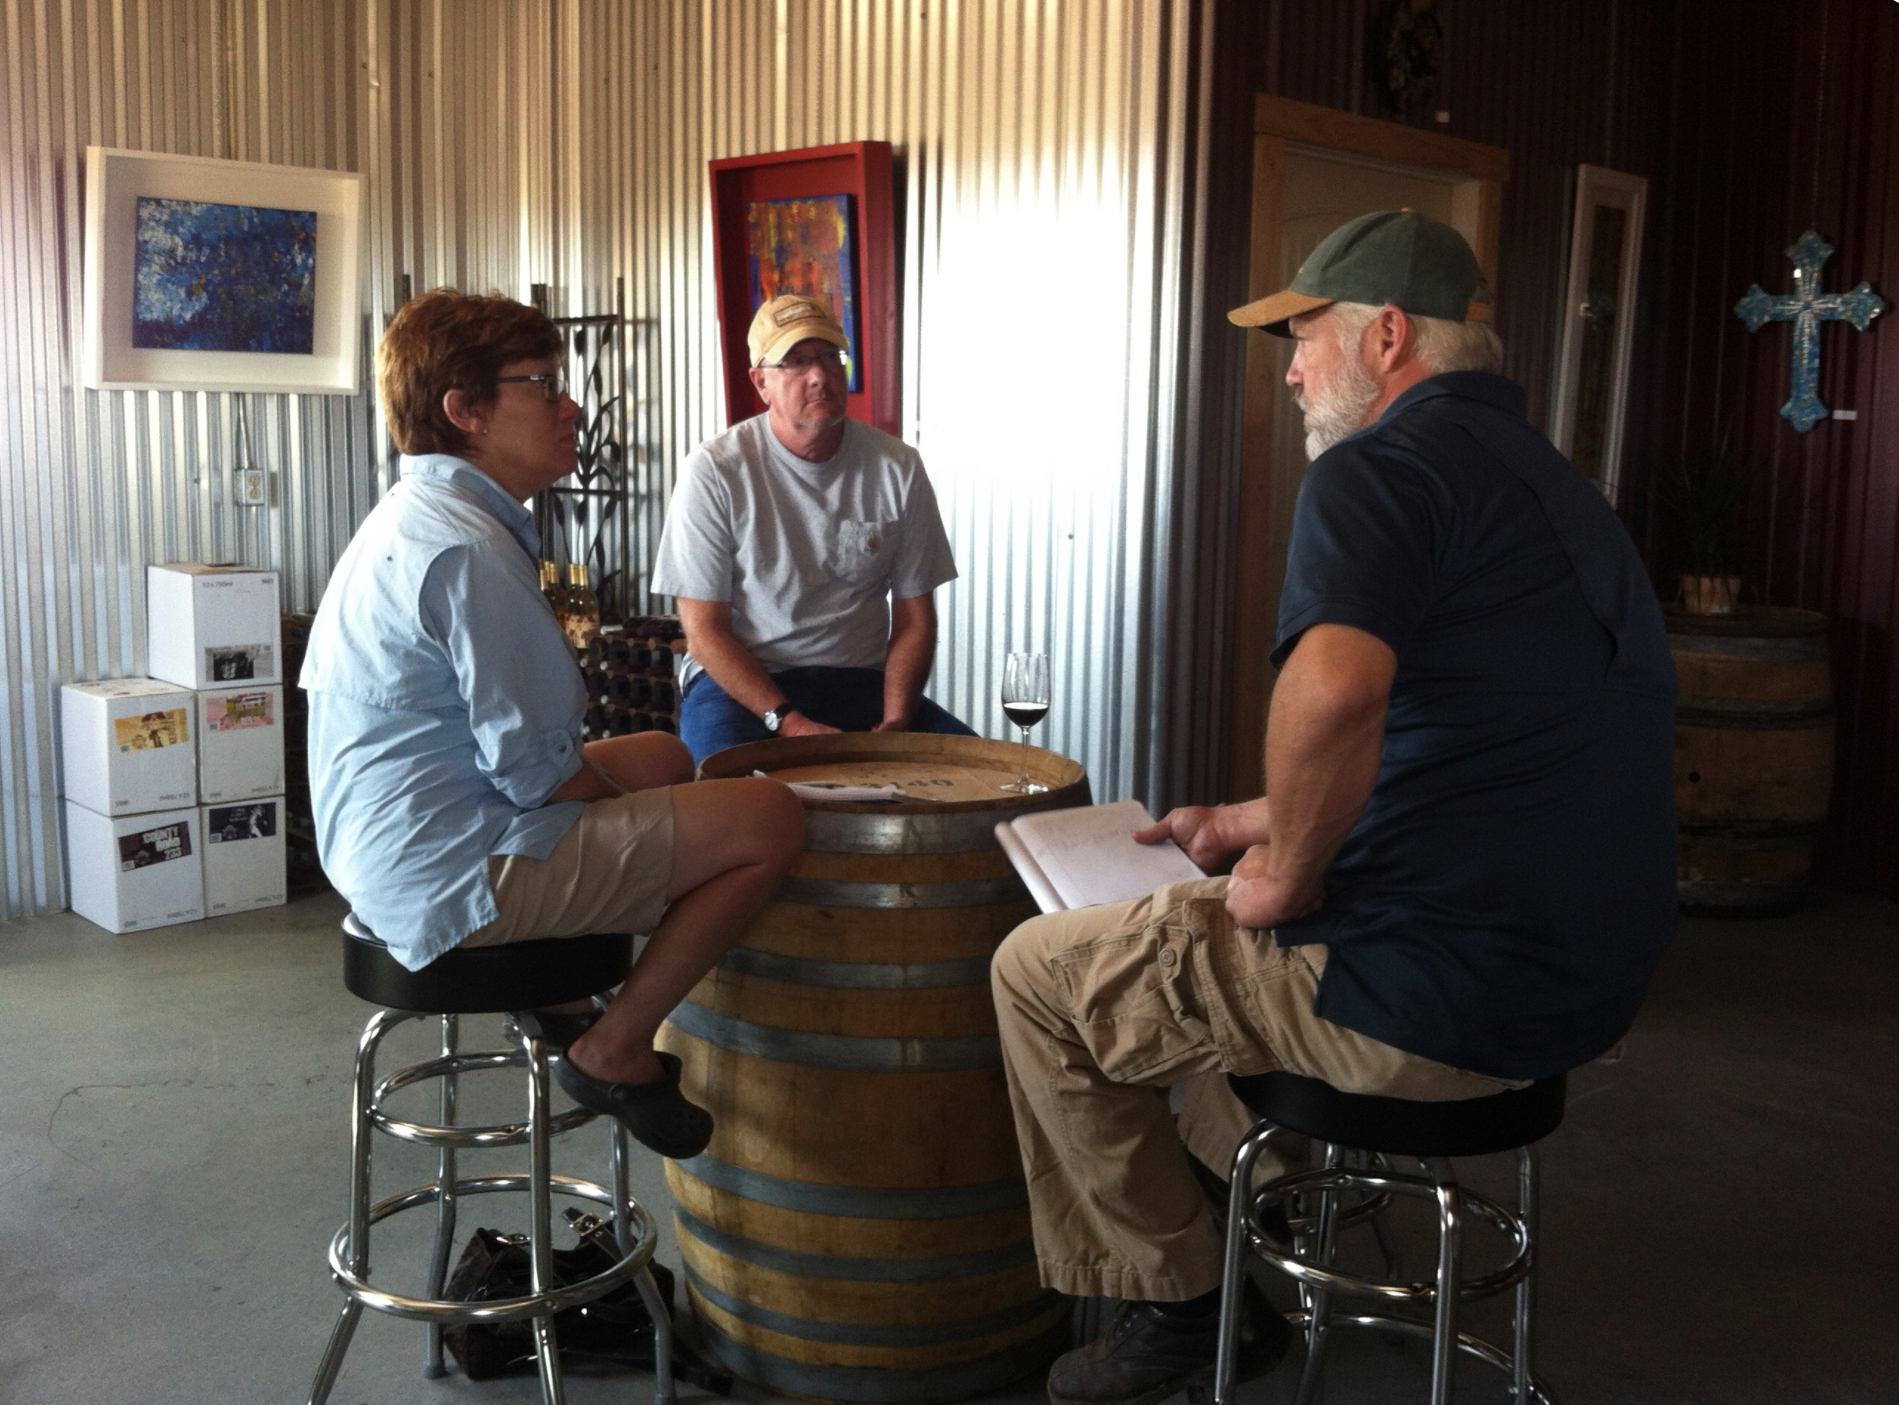 Three people are discussing and sitting around a wine barrel table.